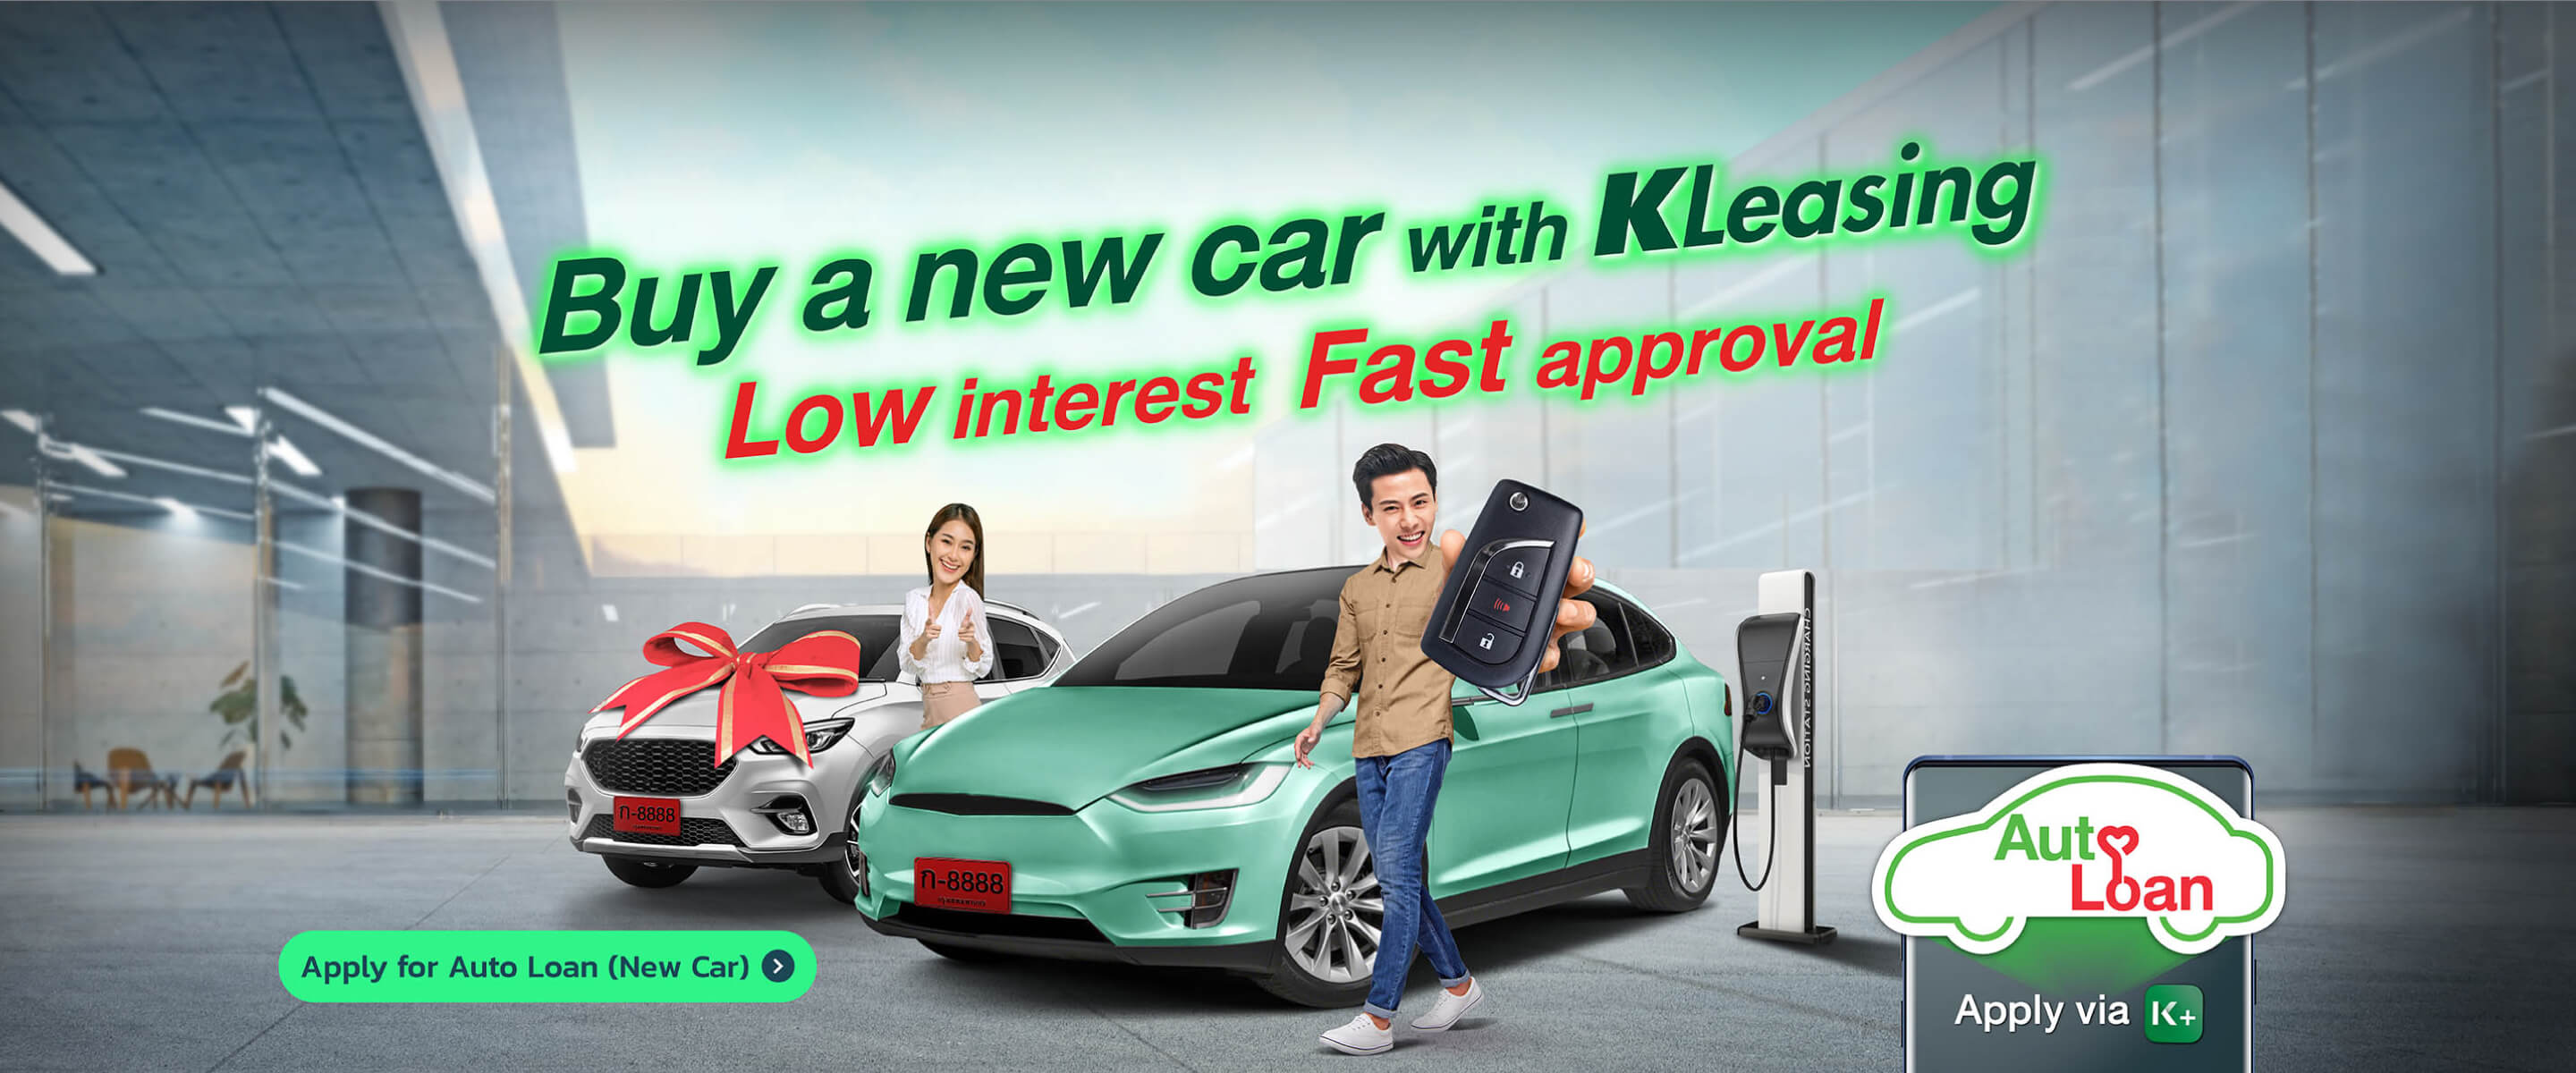 Buy a new car with KLeasing Low interest Fast approval